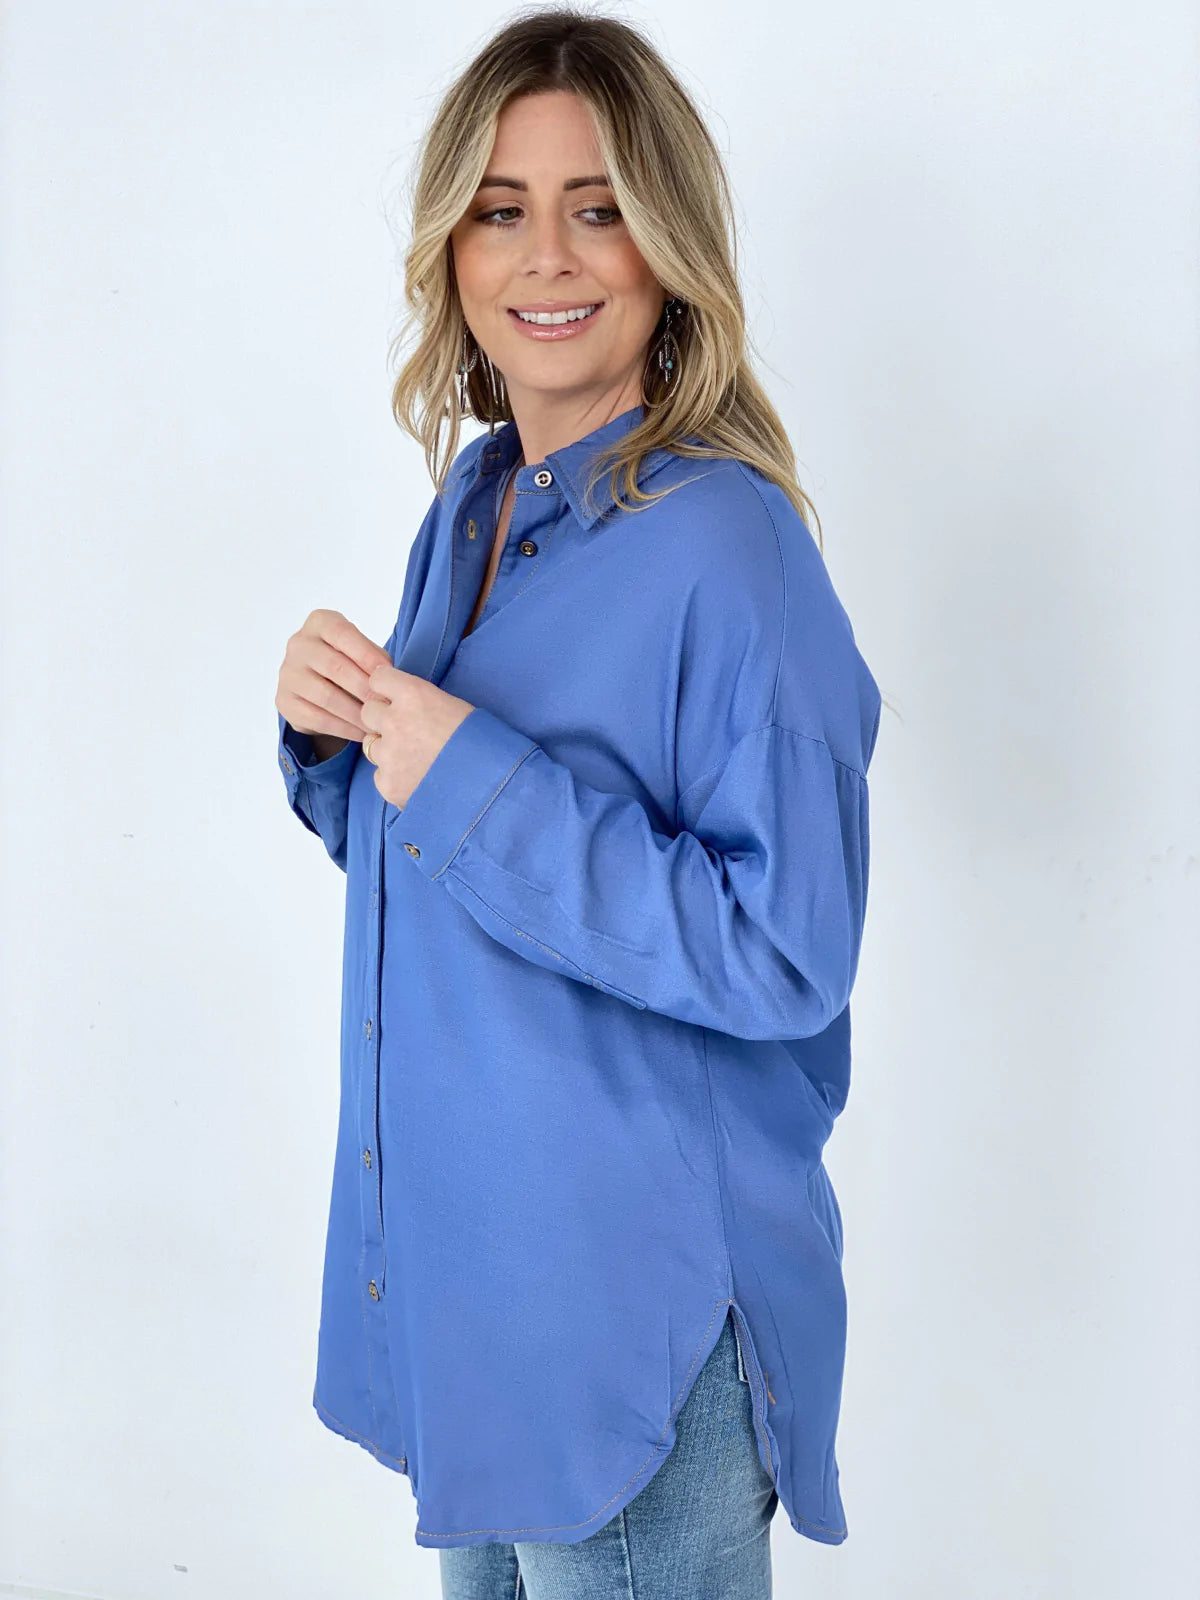 Easel "Twisted Tunic" Solid Button Down Tunic Shirt